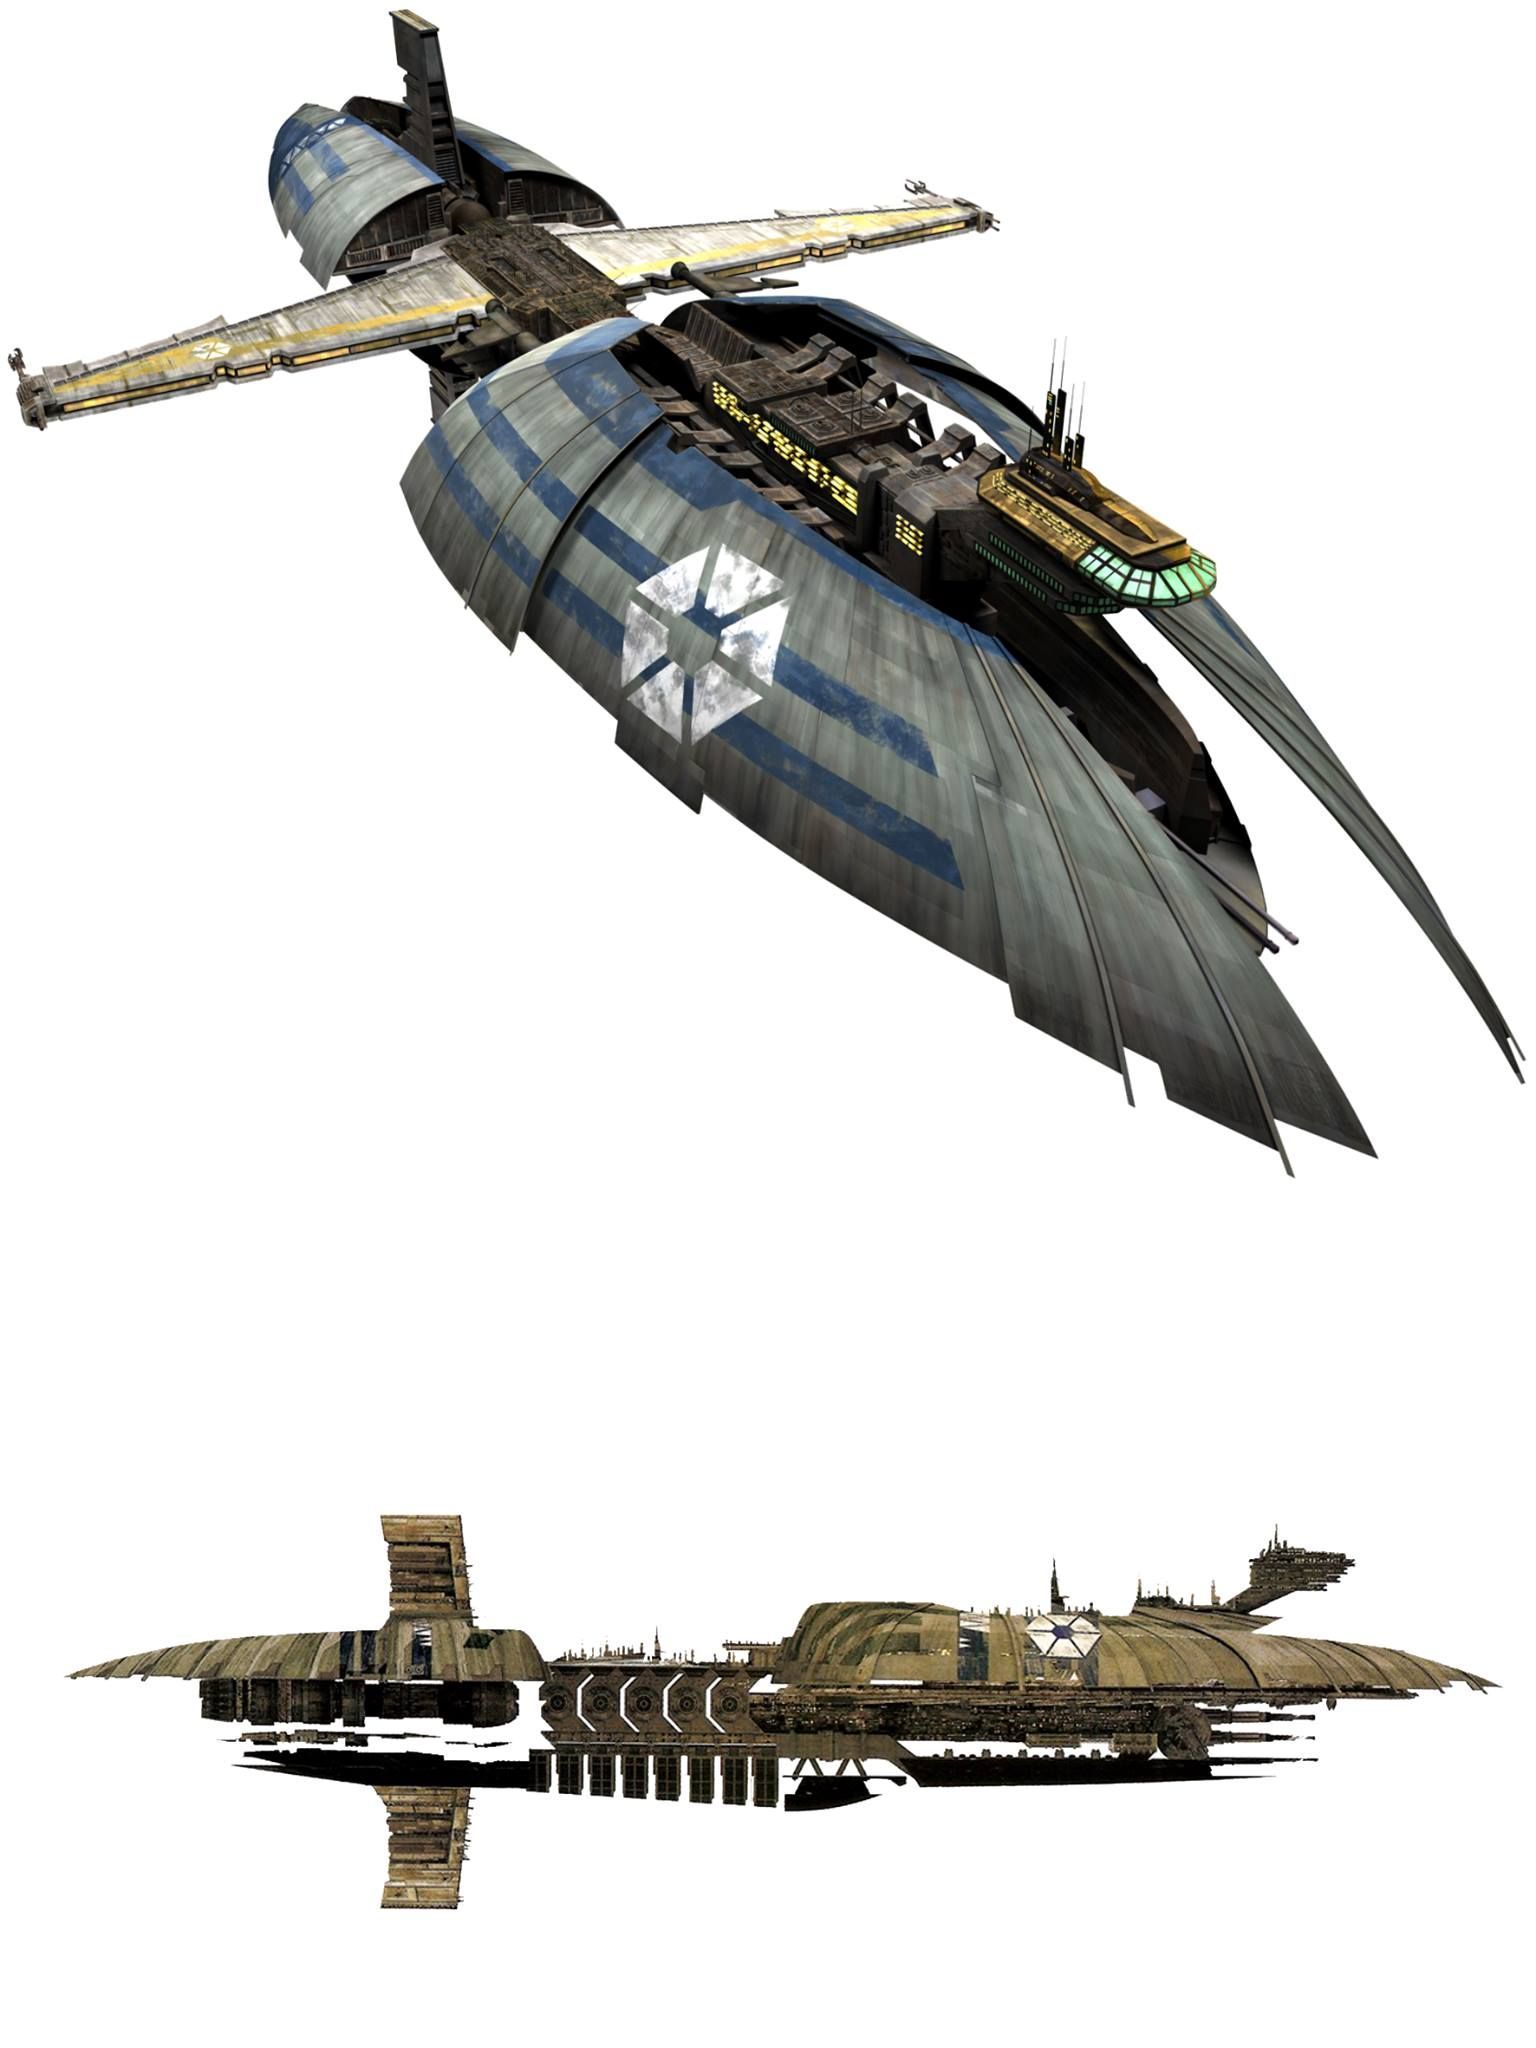 MUNIFICENT CLASS SHIP / Banking Clan Frigate DESCRIPTION: Was A Warship Used By The InterGalactic Banking Clan And By Exten. Star Wars Artwork, Warship, Star Wars